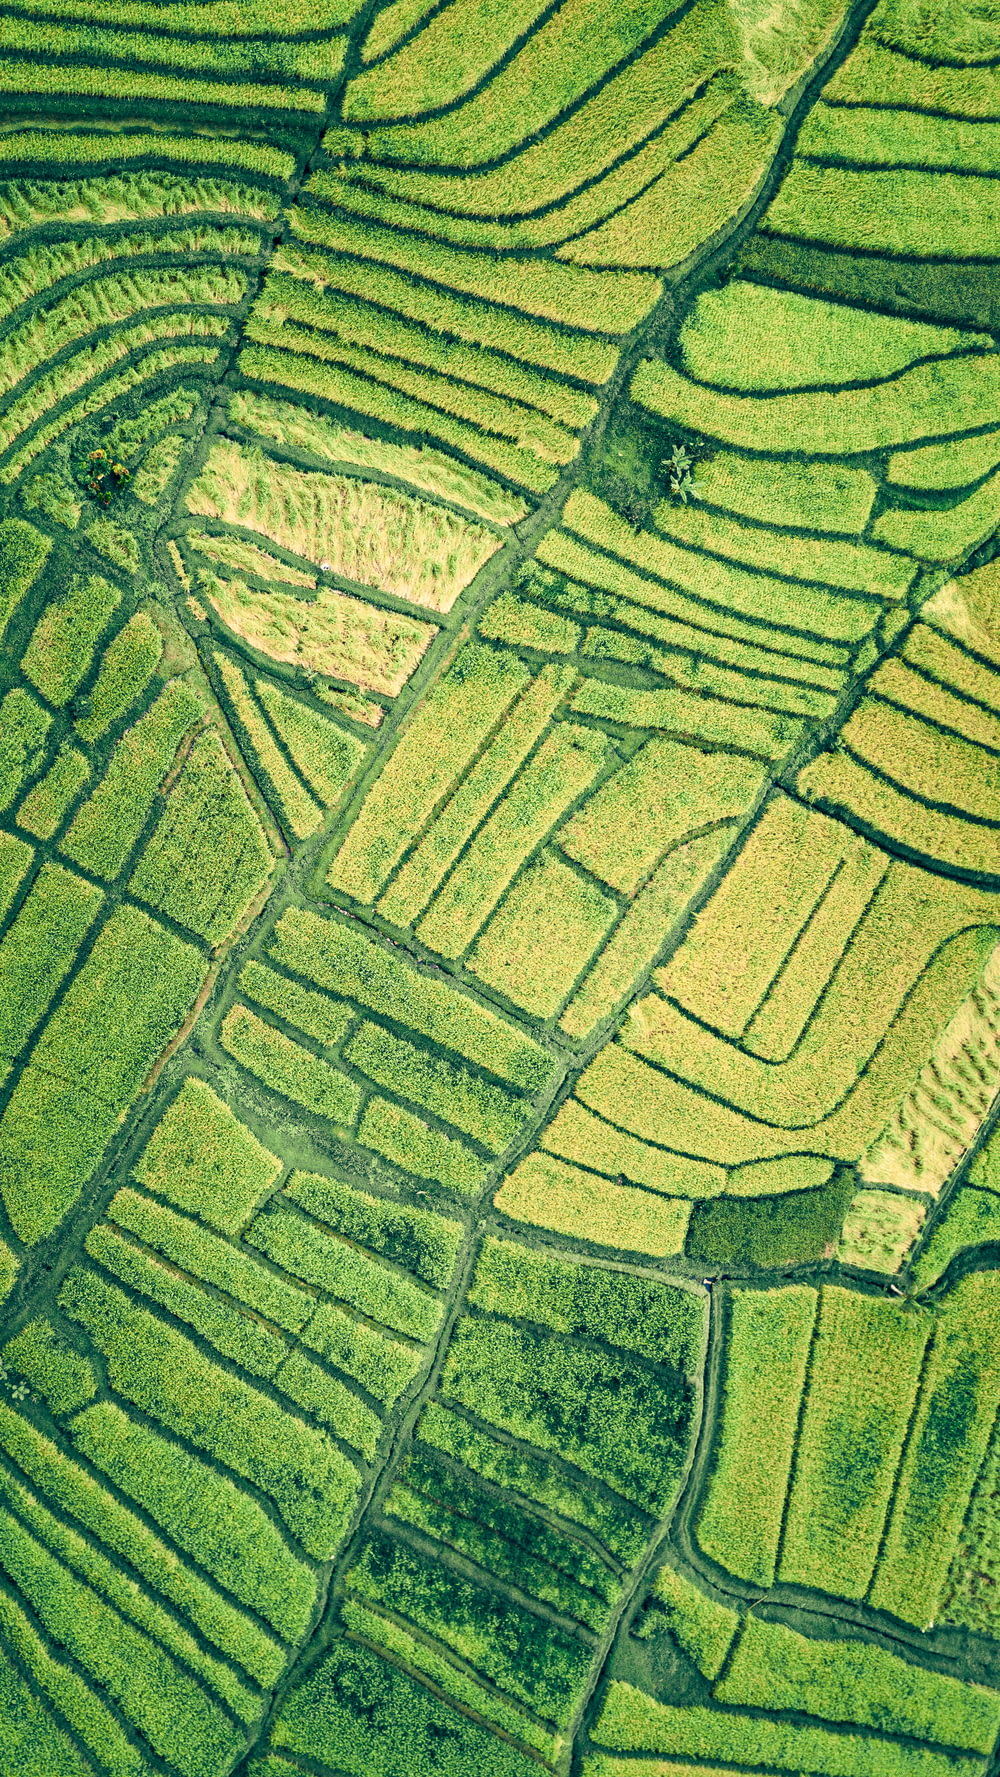 an aerial view of a rice field